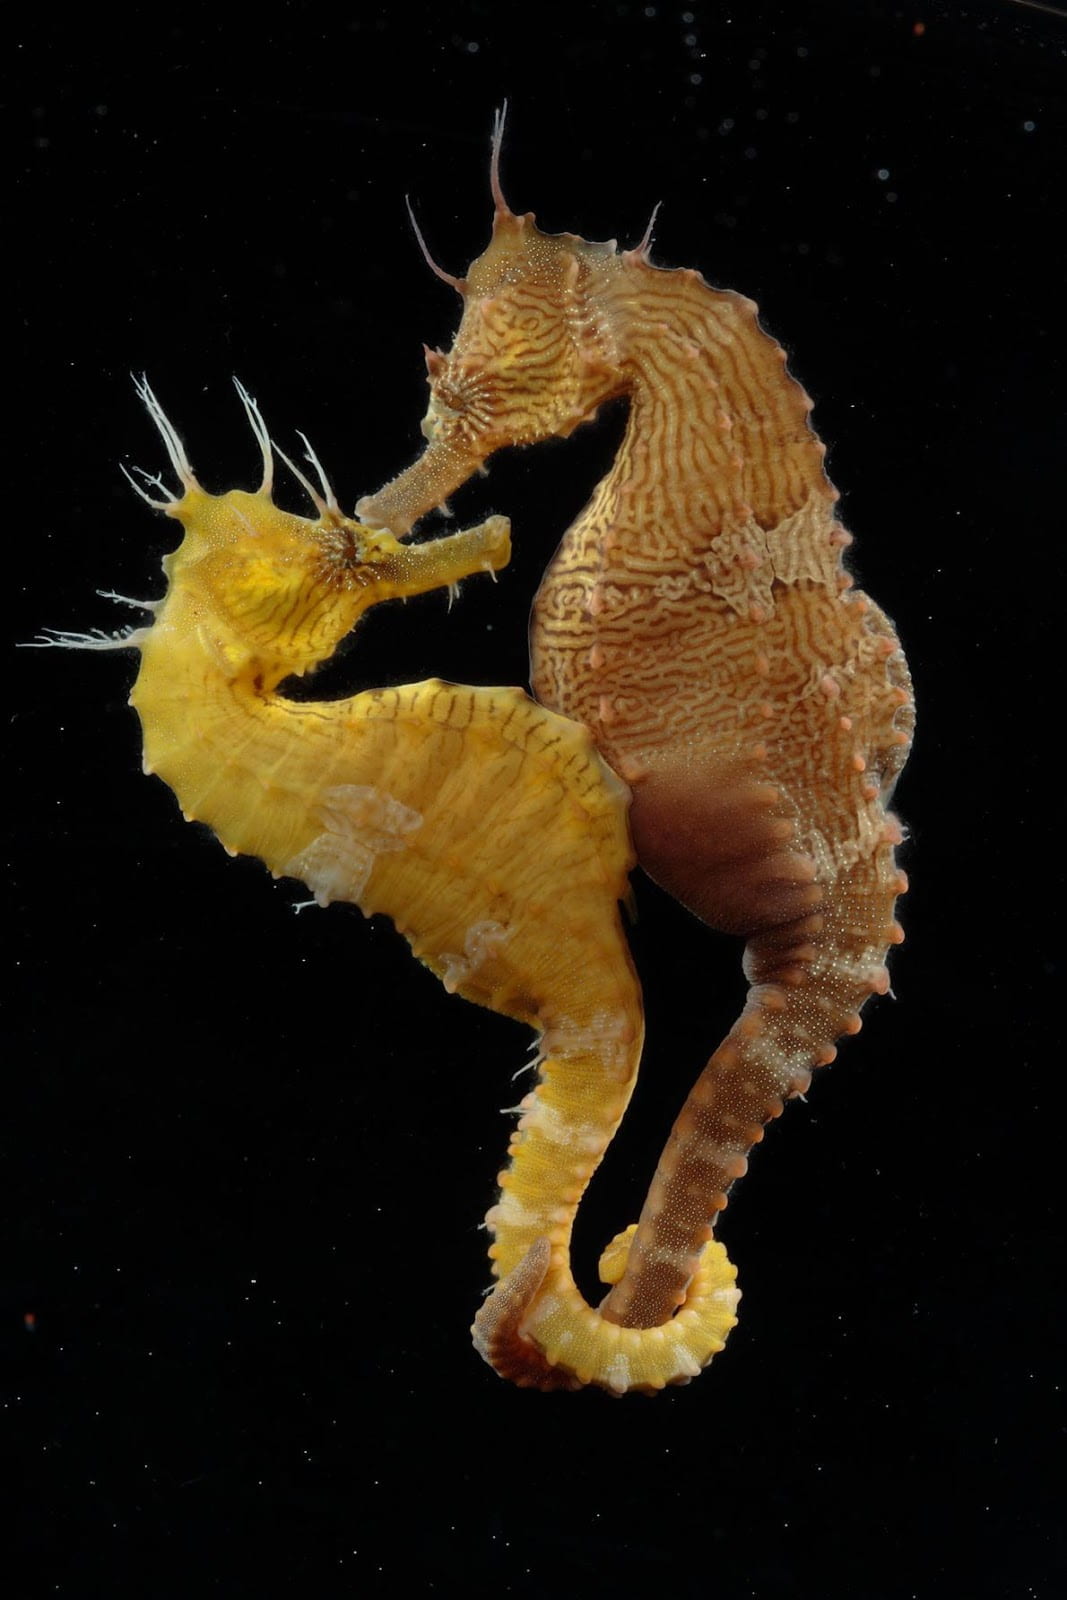 Two seahorses with their tails wrapped around each other.